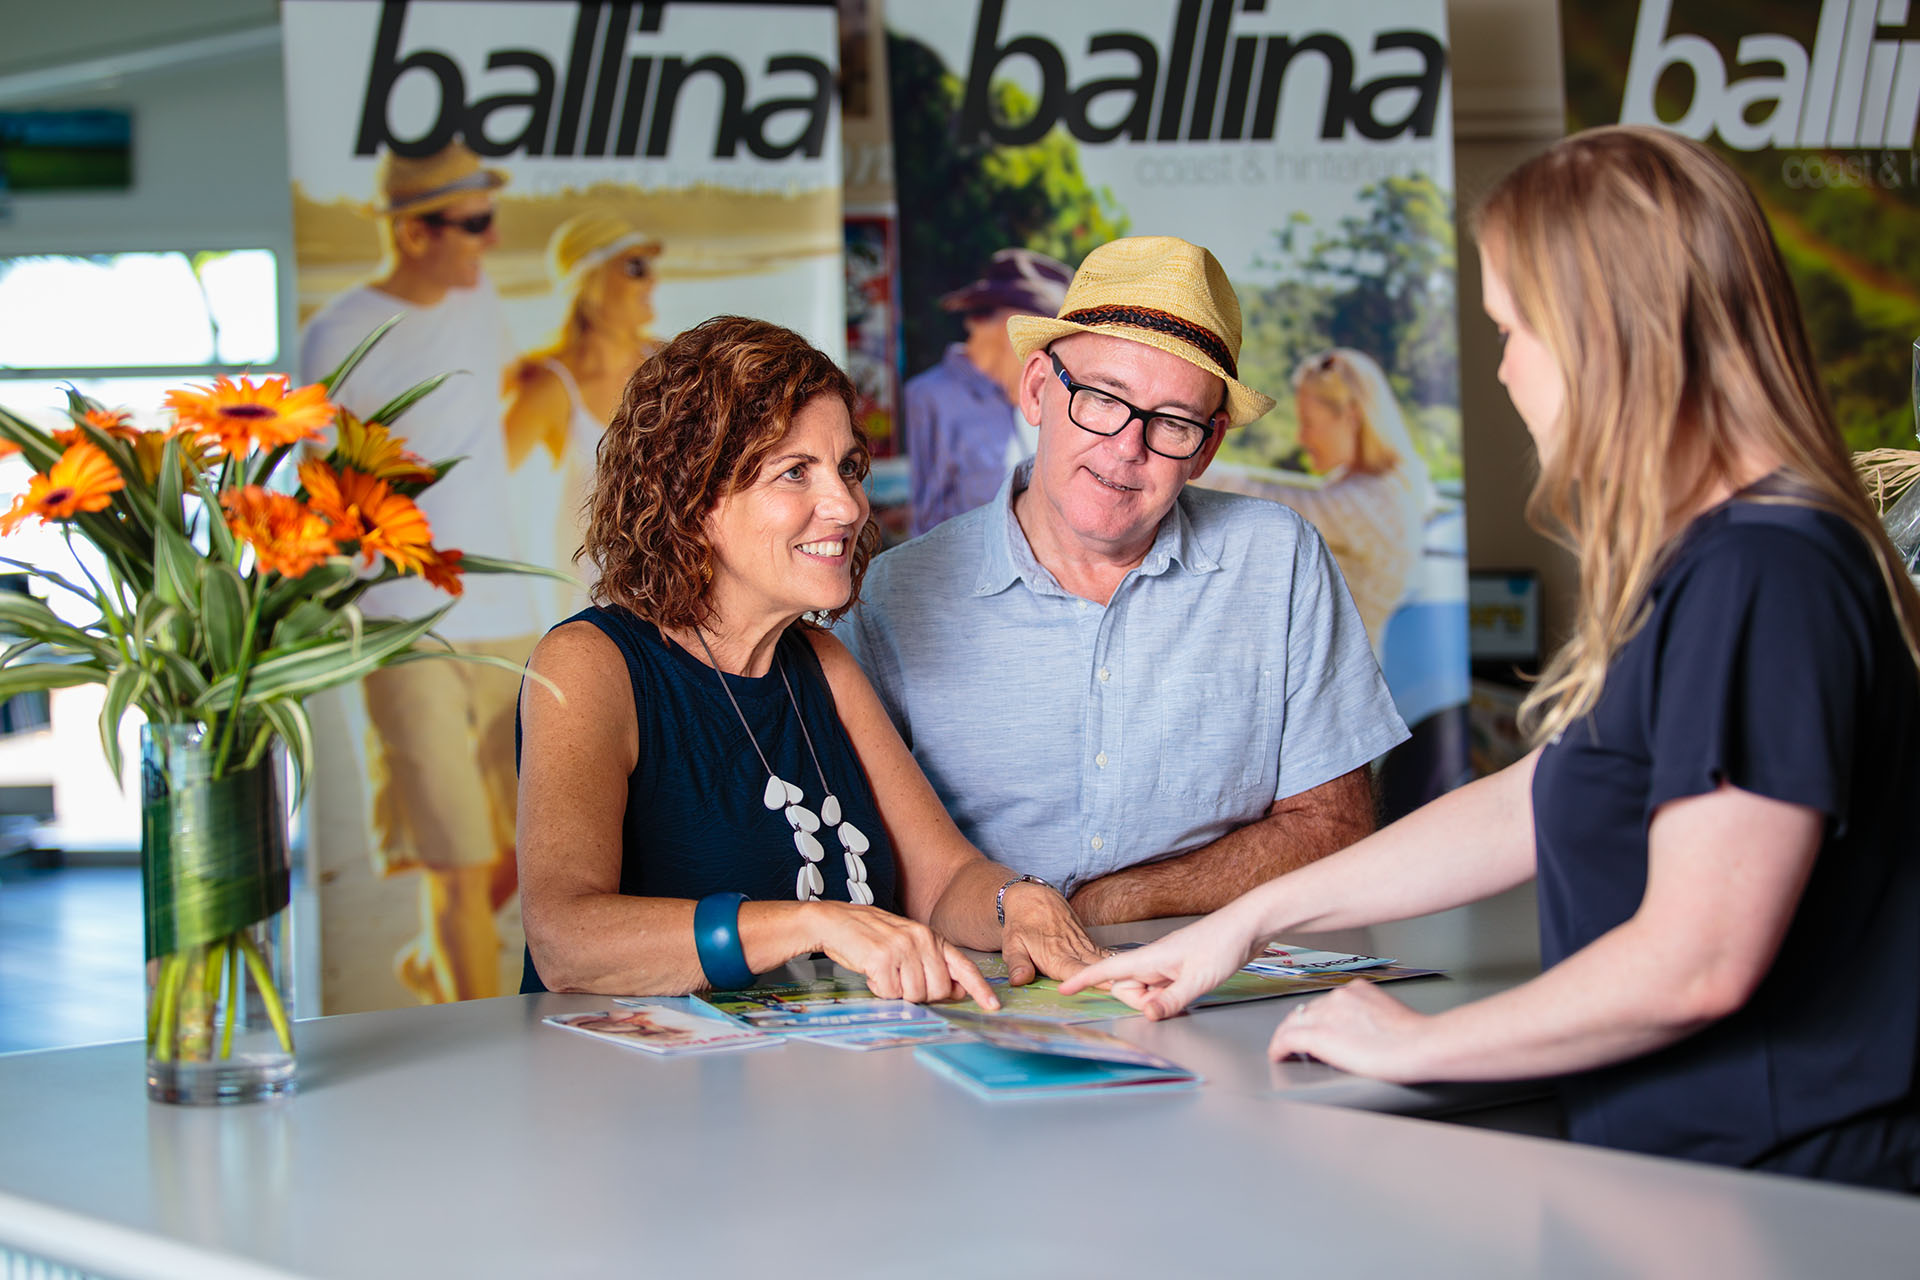 Helpful Service at the Ballina Visitor Information Centre